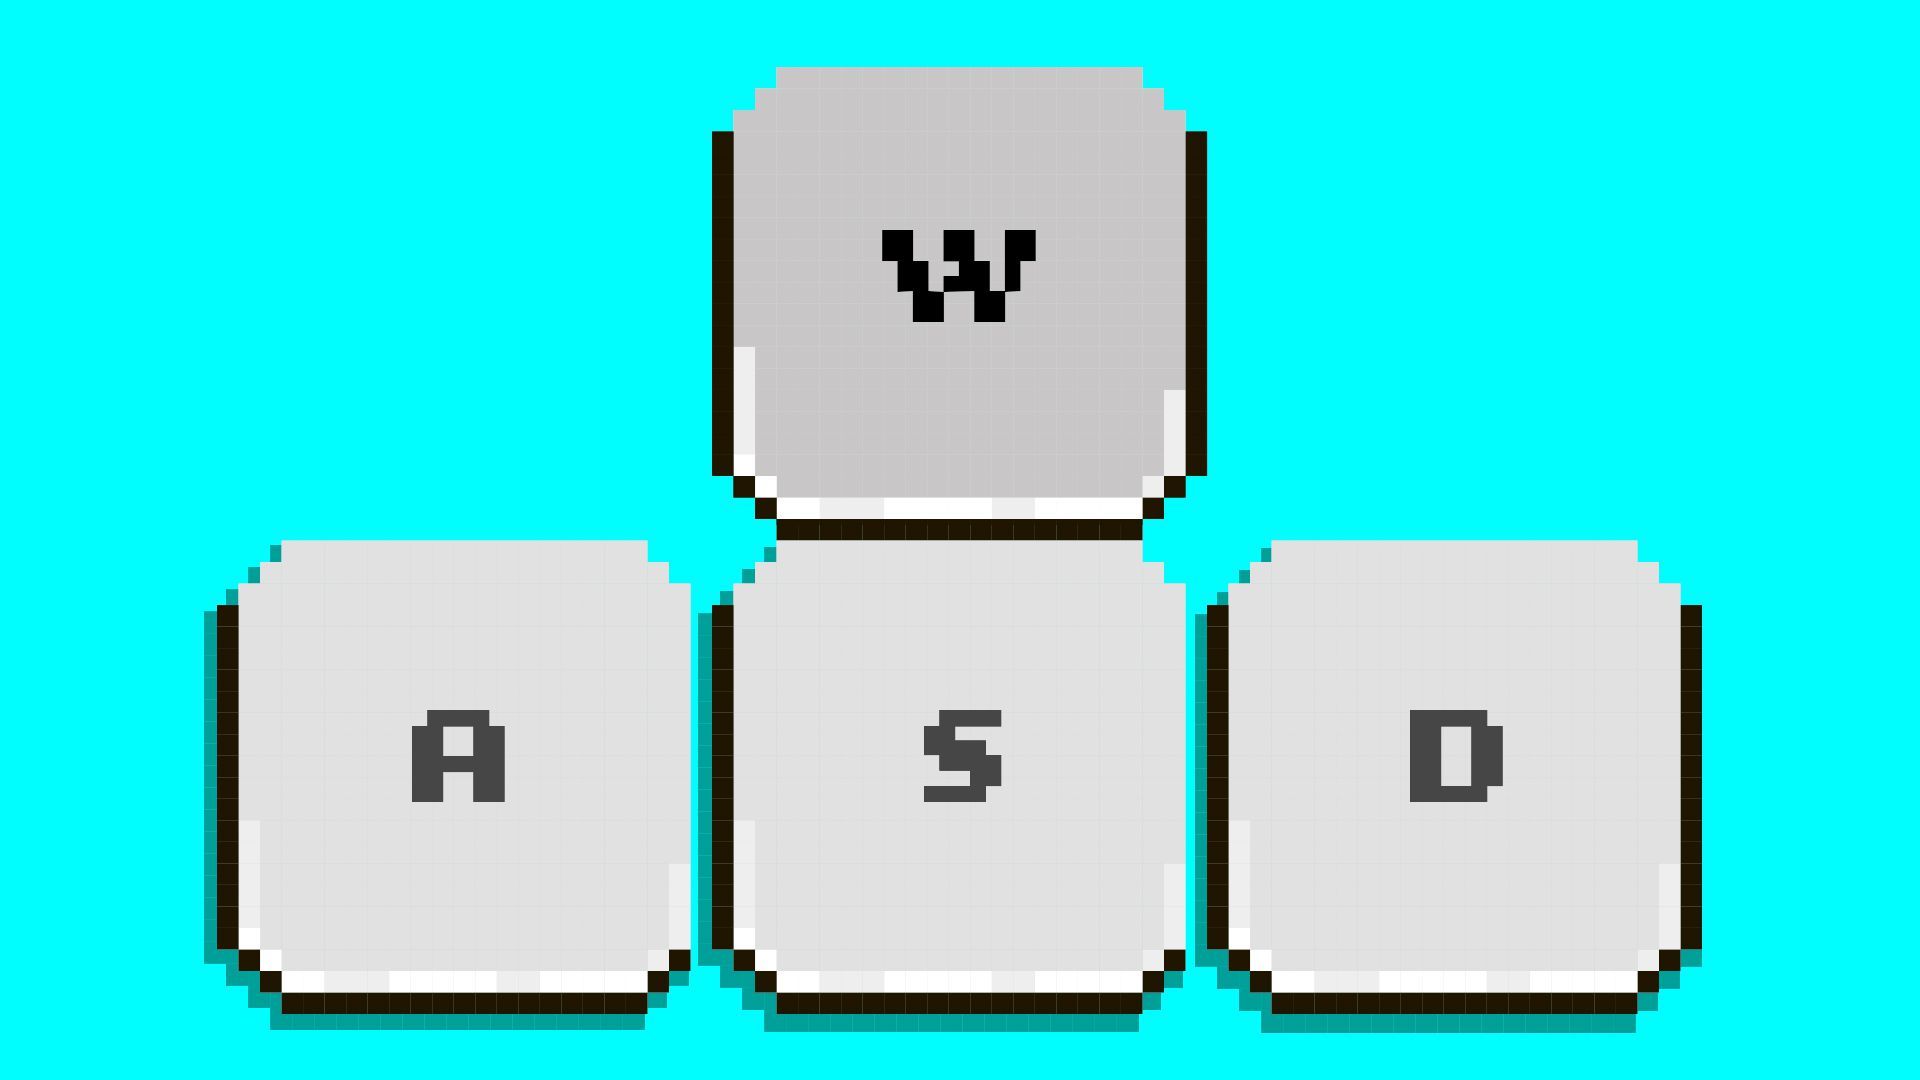 Illustration of the WASD keys on a keyboard being pressed.